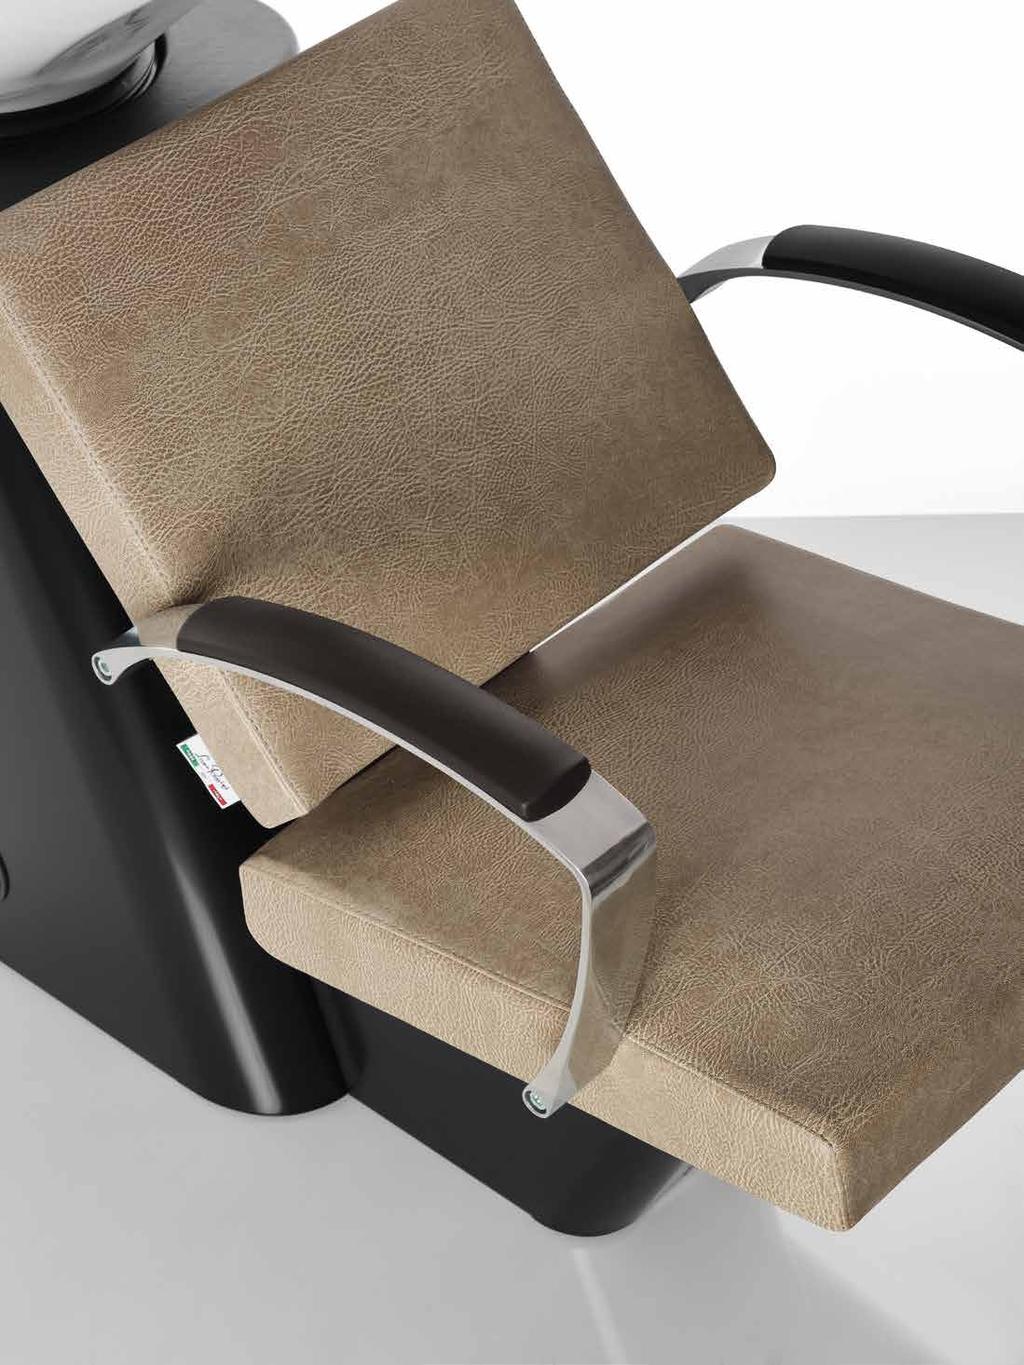 attention to the finest detail: the aluminum armrests give the